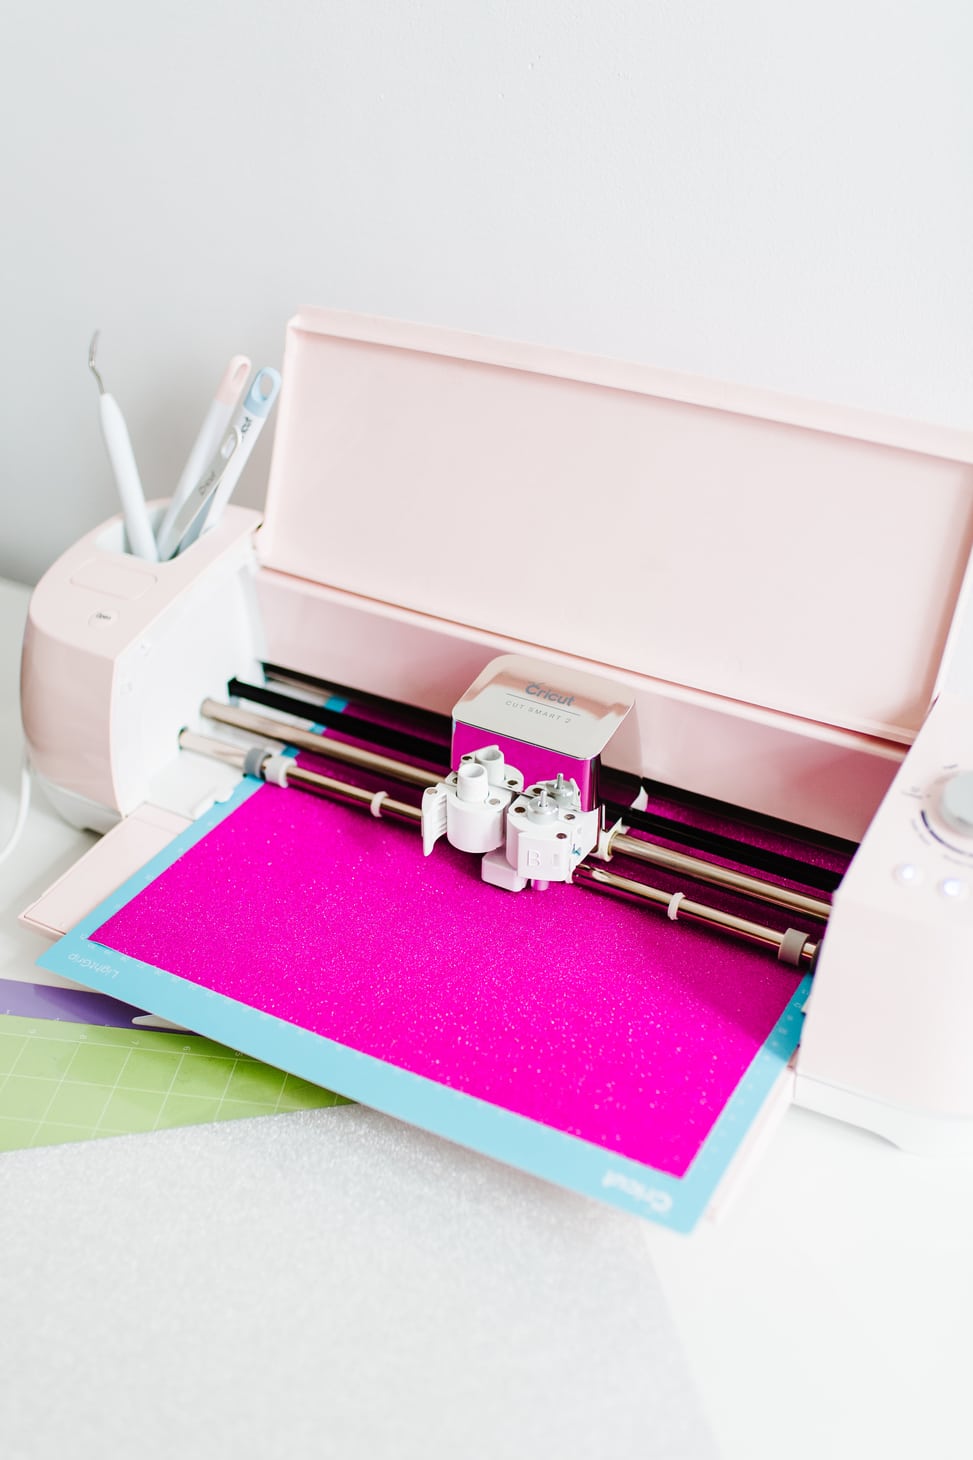 A Cricut Explore Air 2 Machine from Michael's Weddings in action with pink paper